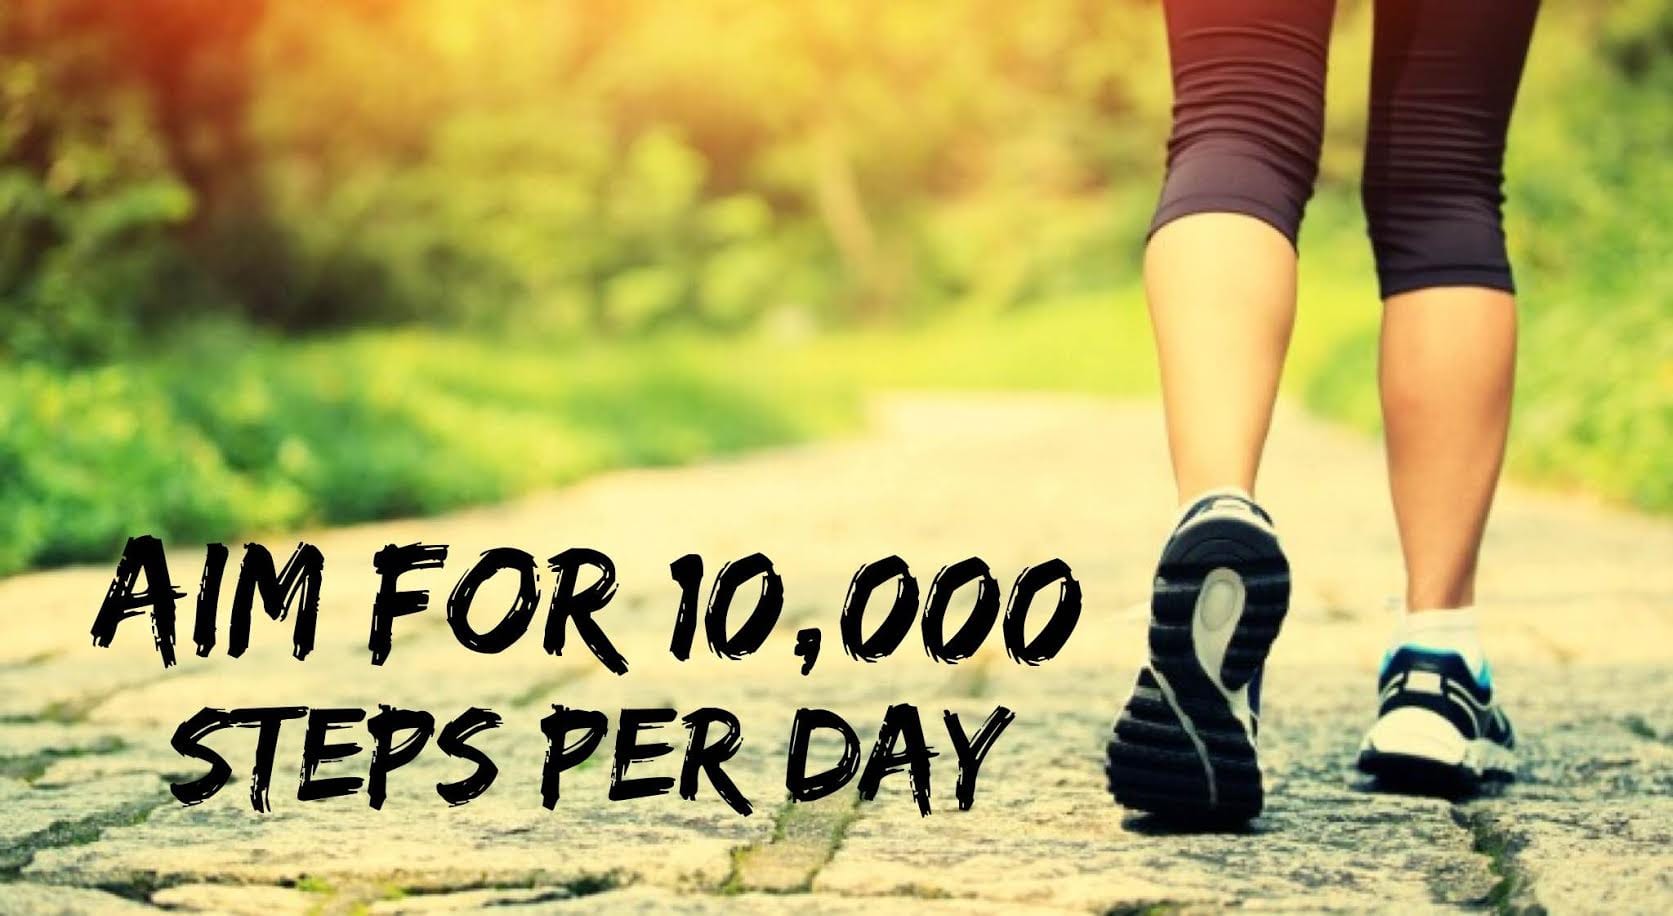 aim for 10,000 steps per day to lose weight 